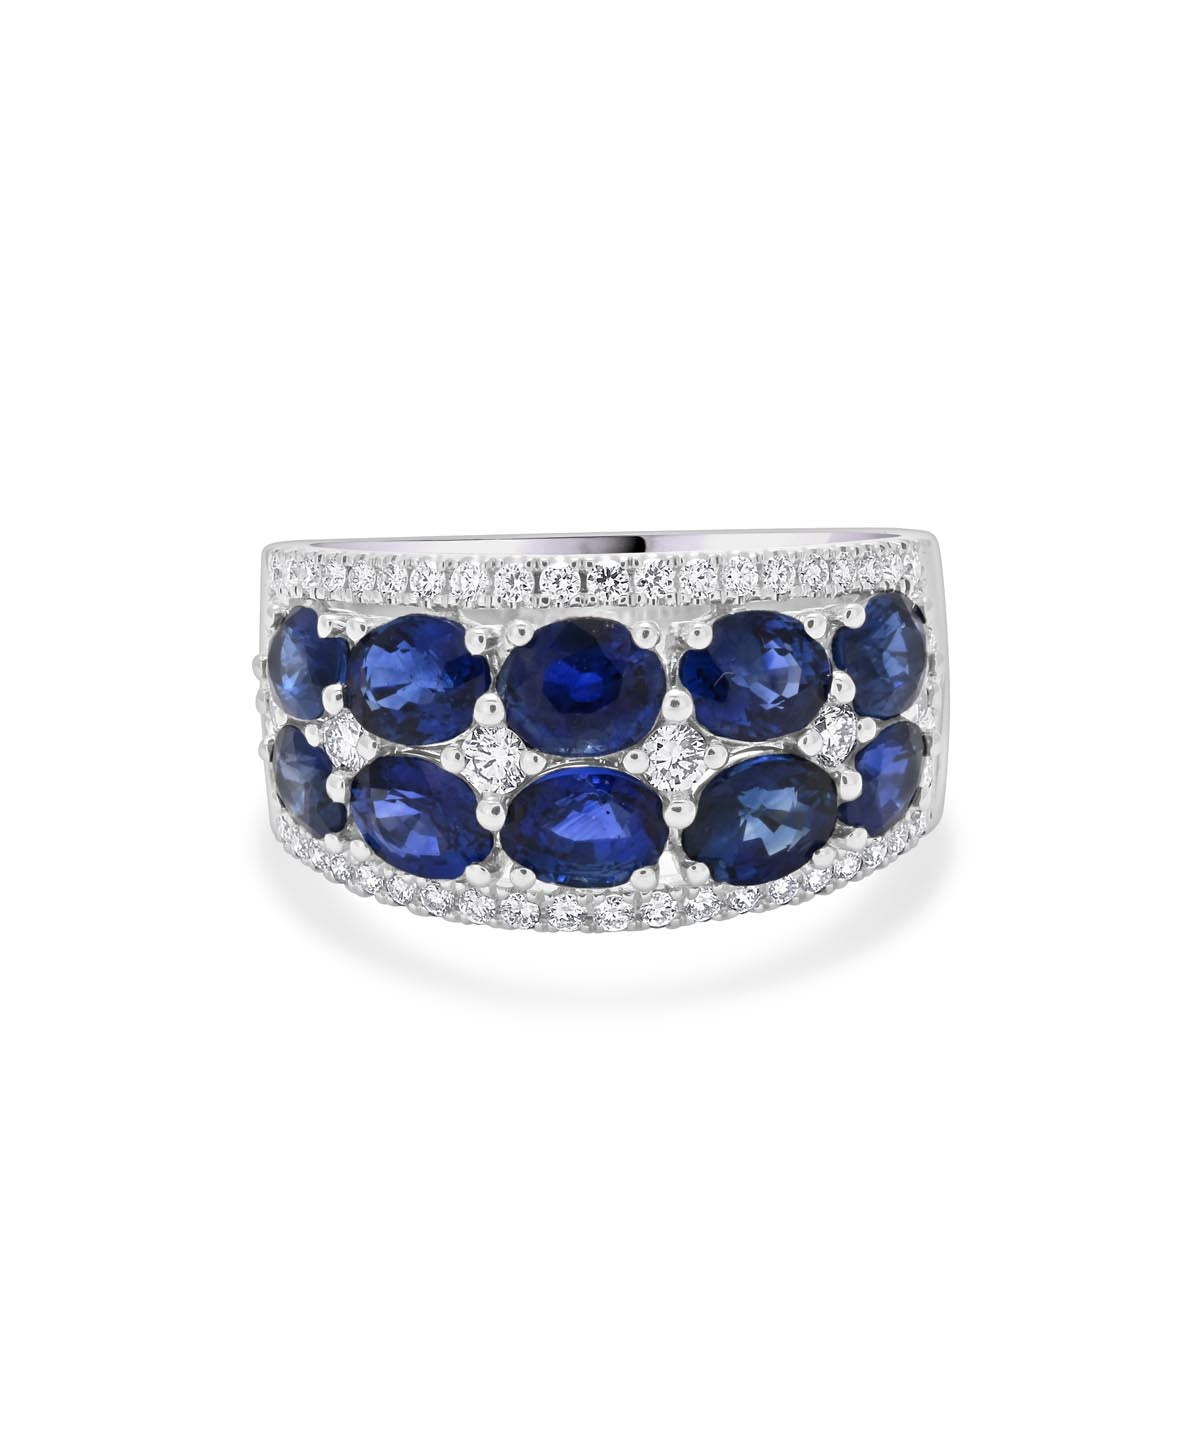 18K White Gold Diamond and Sapphire Wide Ring